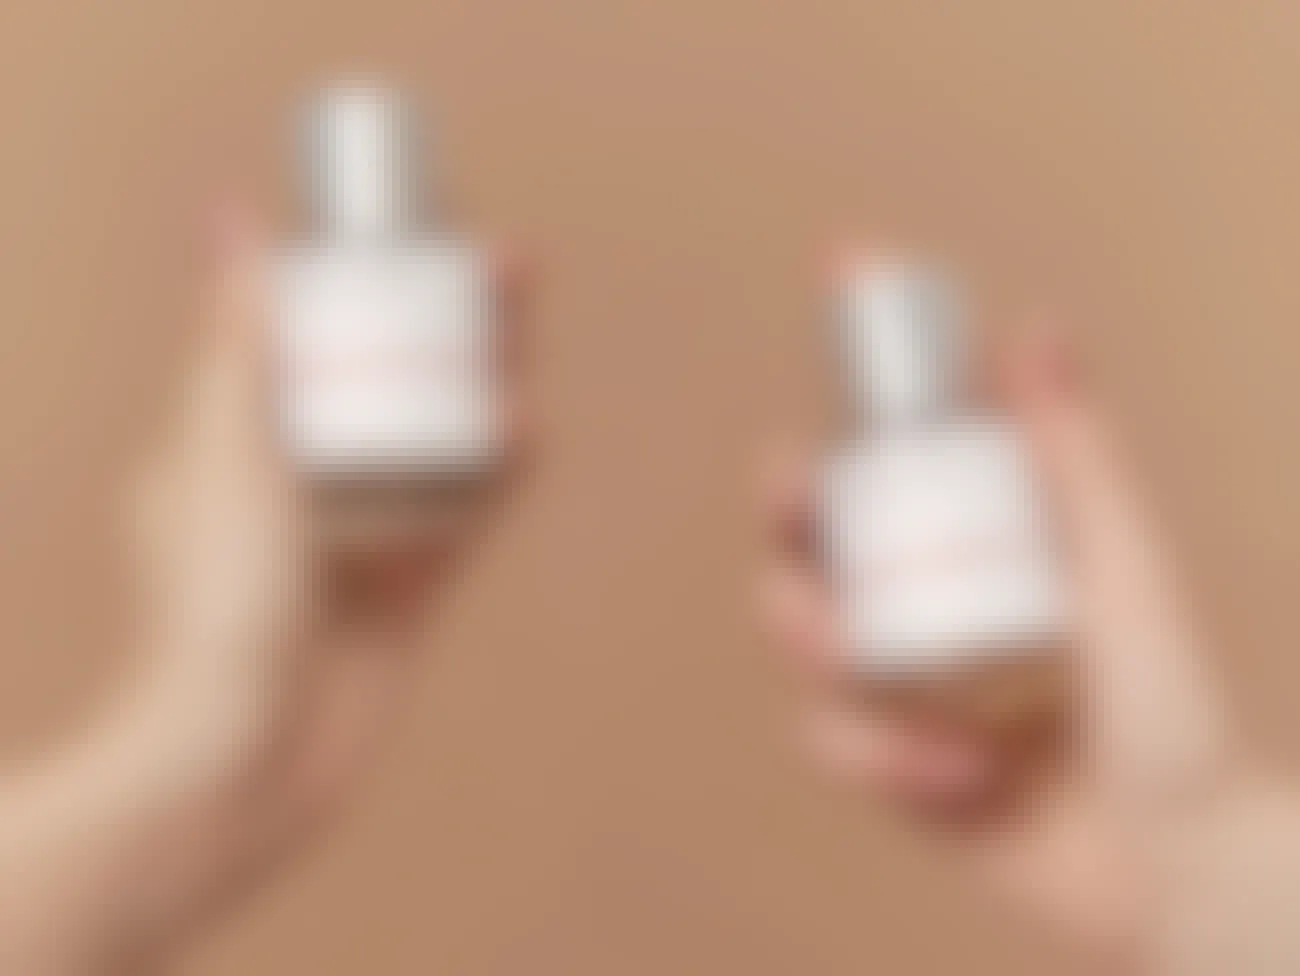 Dossier fragrances held by two hands